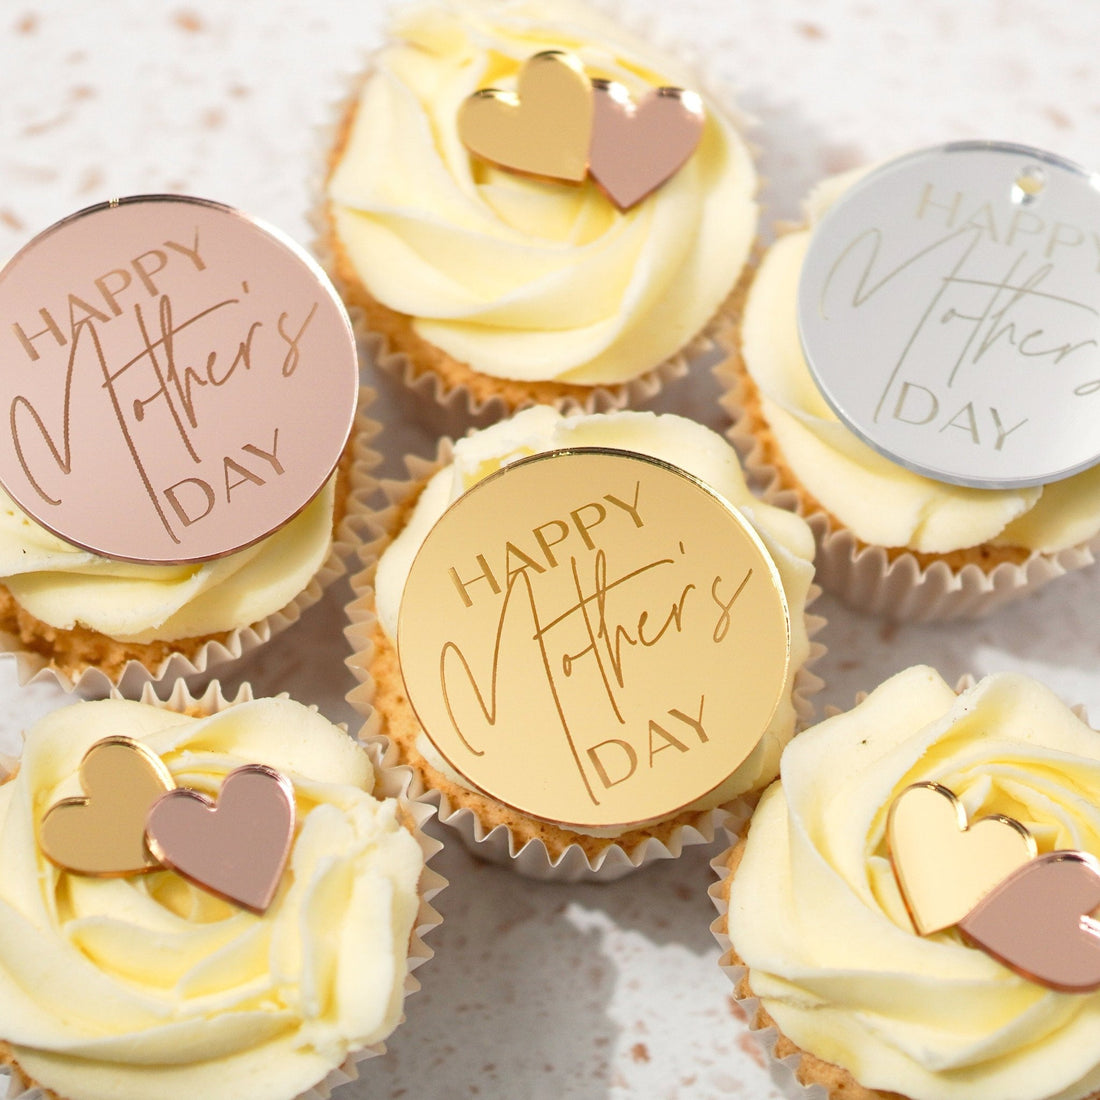 Happy Mothers Day cup cake charm